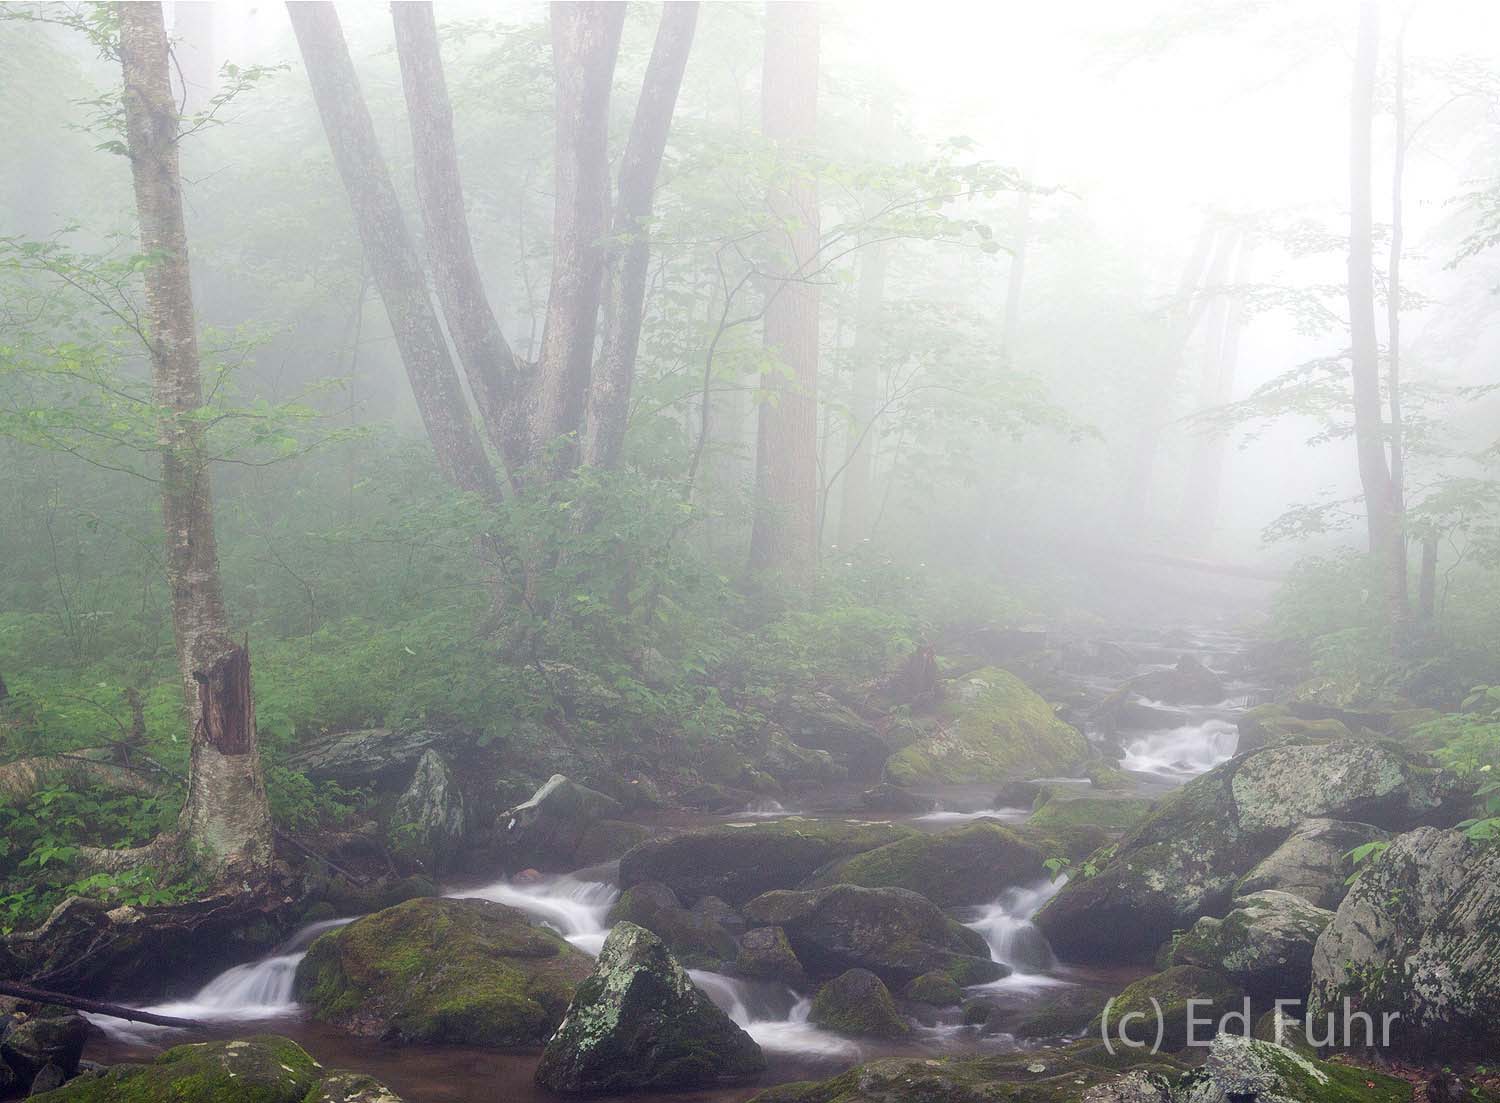 The abundant cascades on the approach to South River Waterfall are beautiful and soothing on this foggy June morning in 2012.